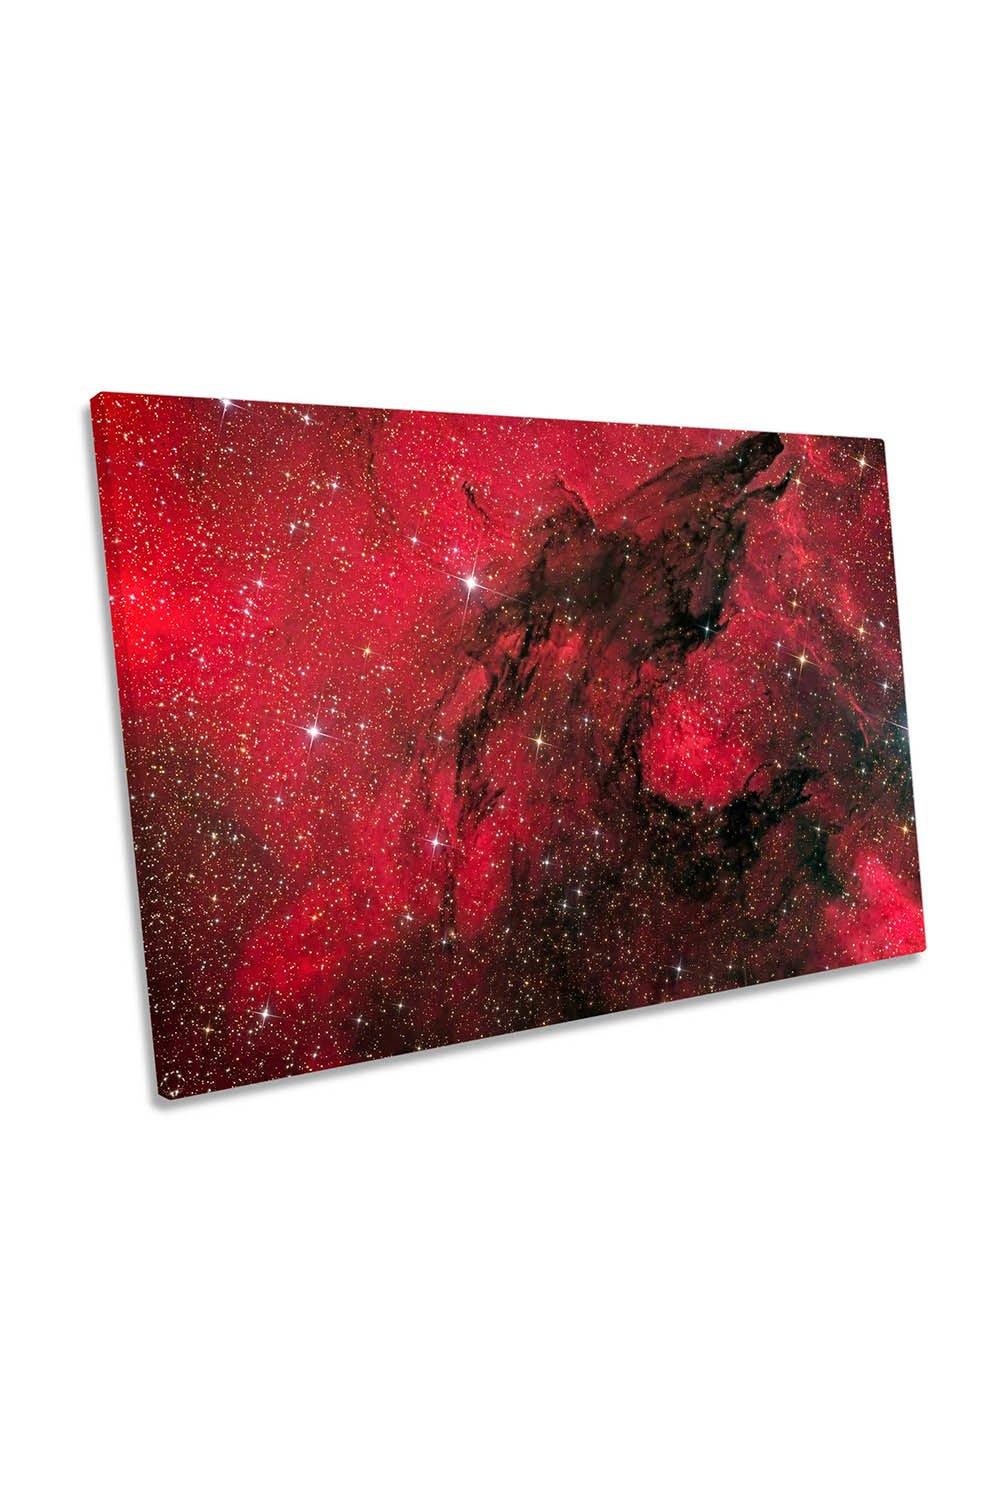 Hungry like the Wolf Outer Space Astronomy Canvas Wall Art Picture Print